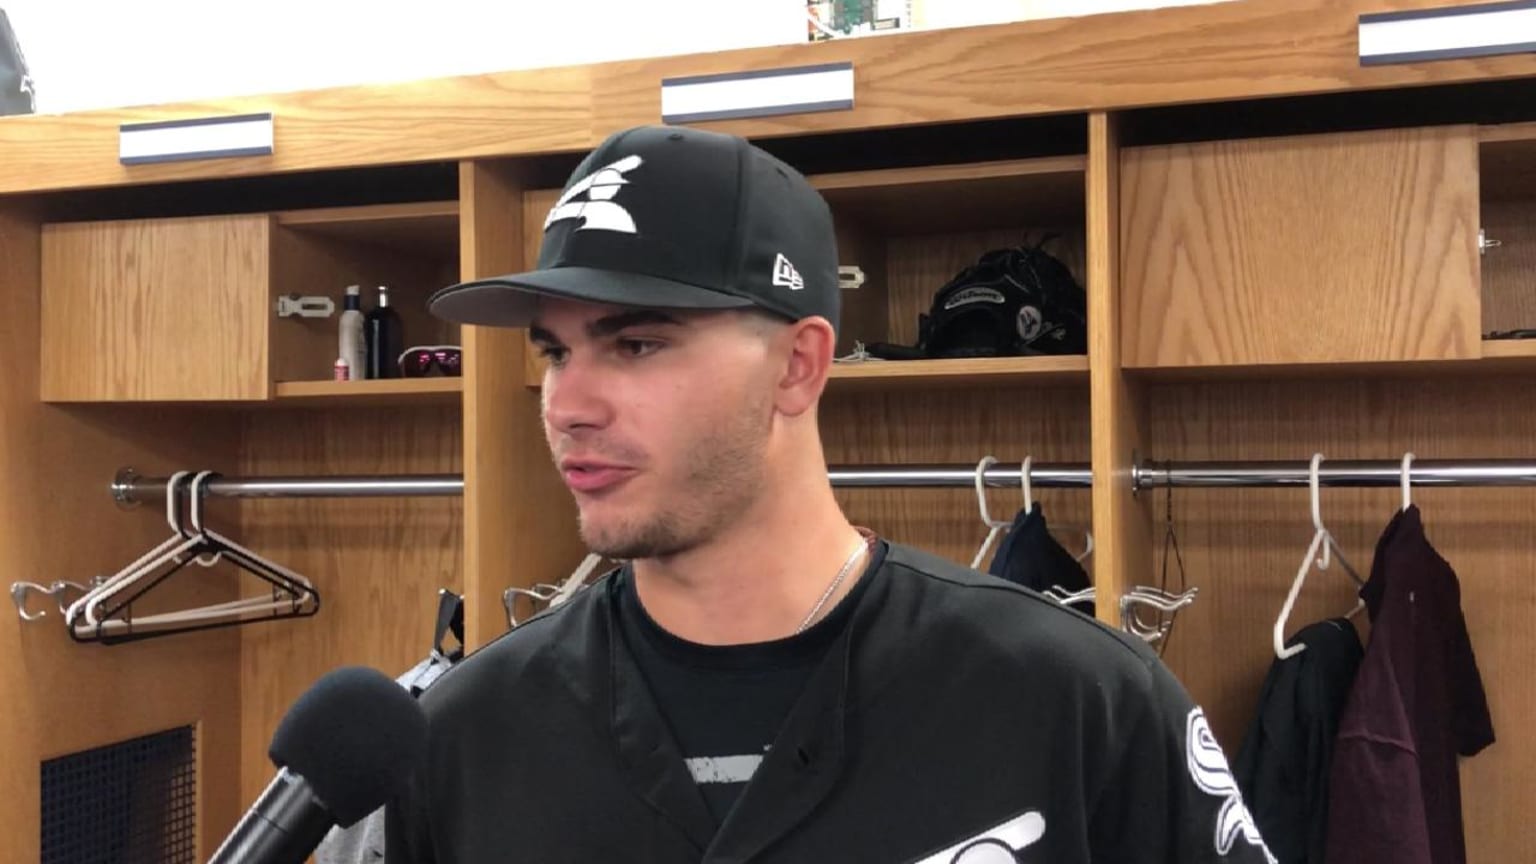 We are all Dylan Cease stans. - Chicago White Sox